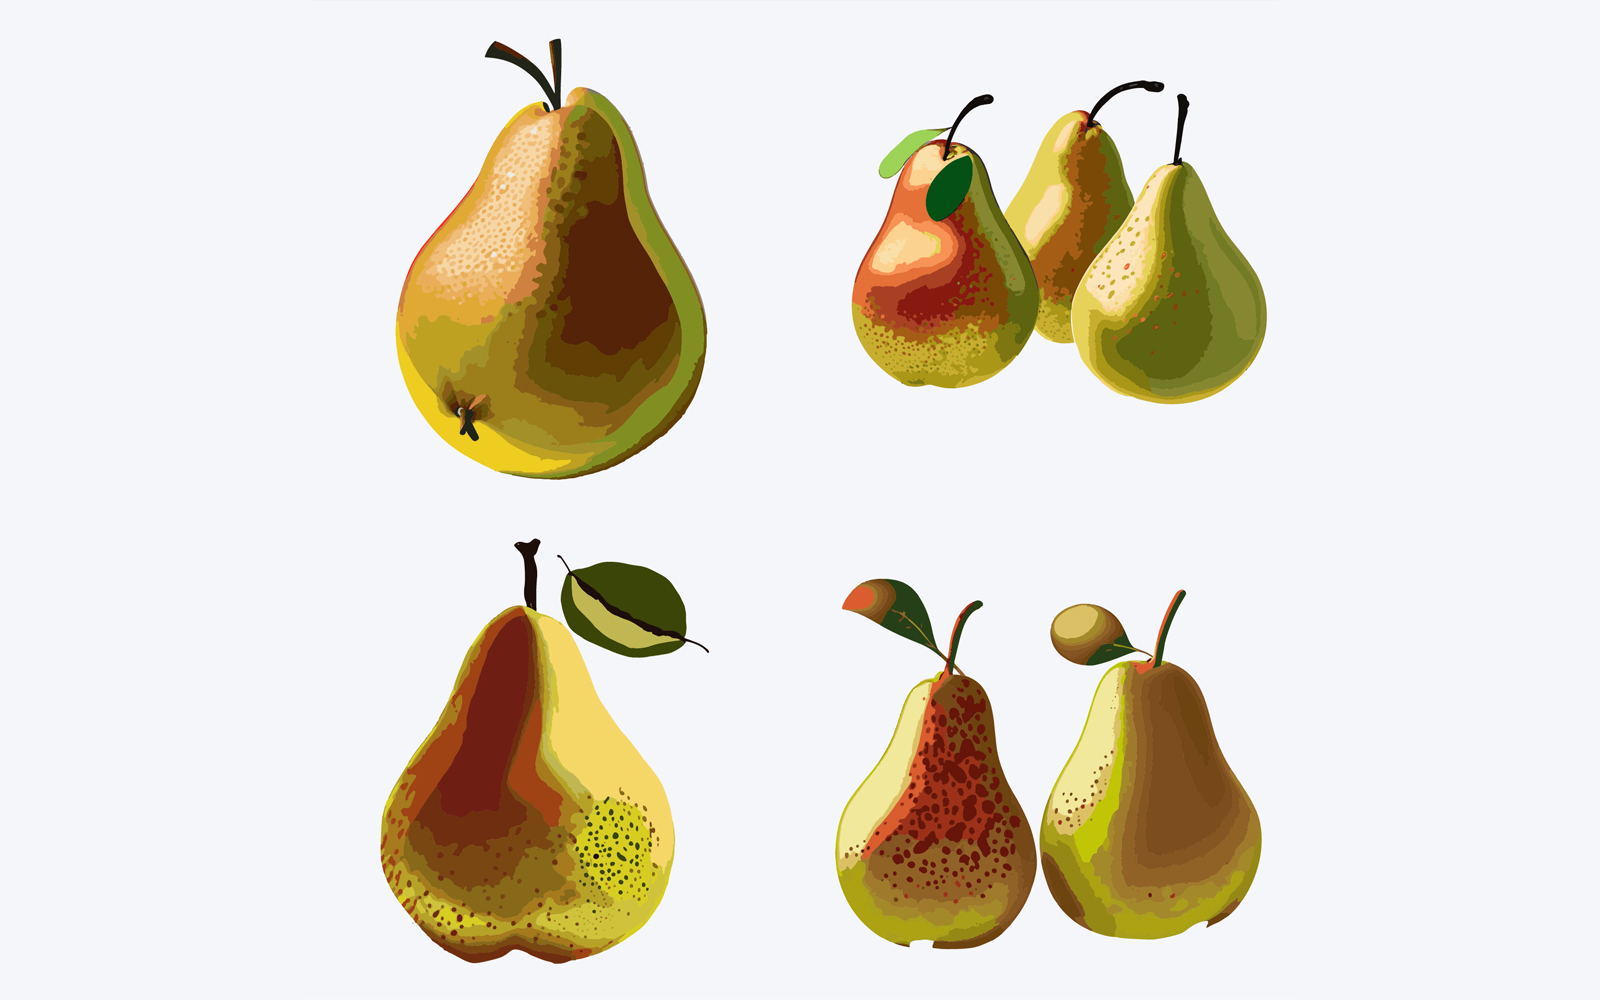 Set of ripe pears on a white background. Vector illustration.